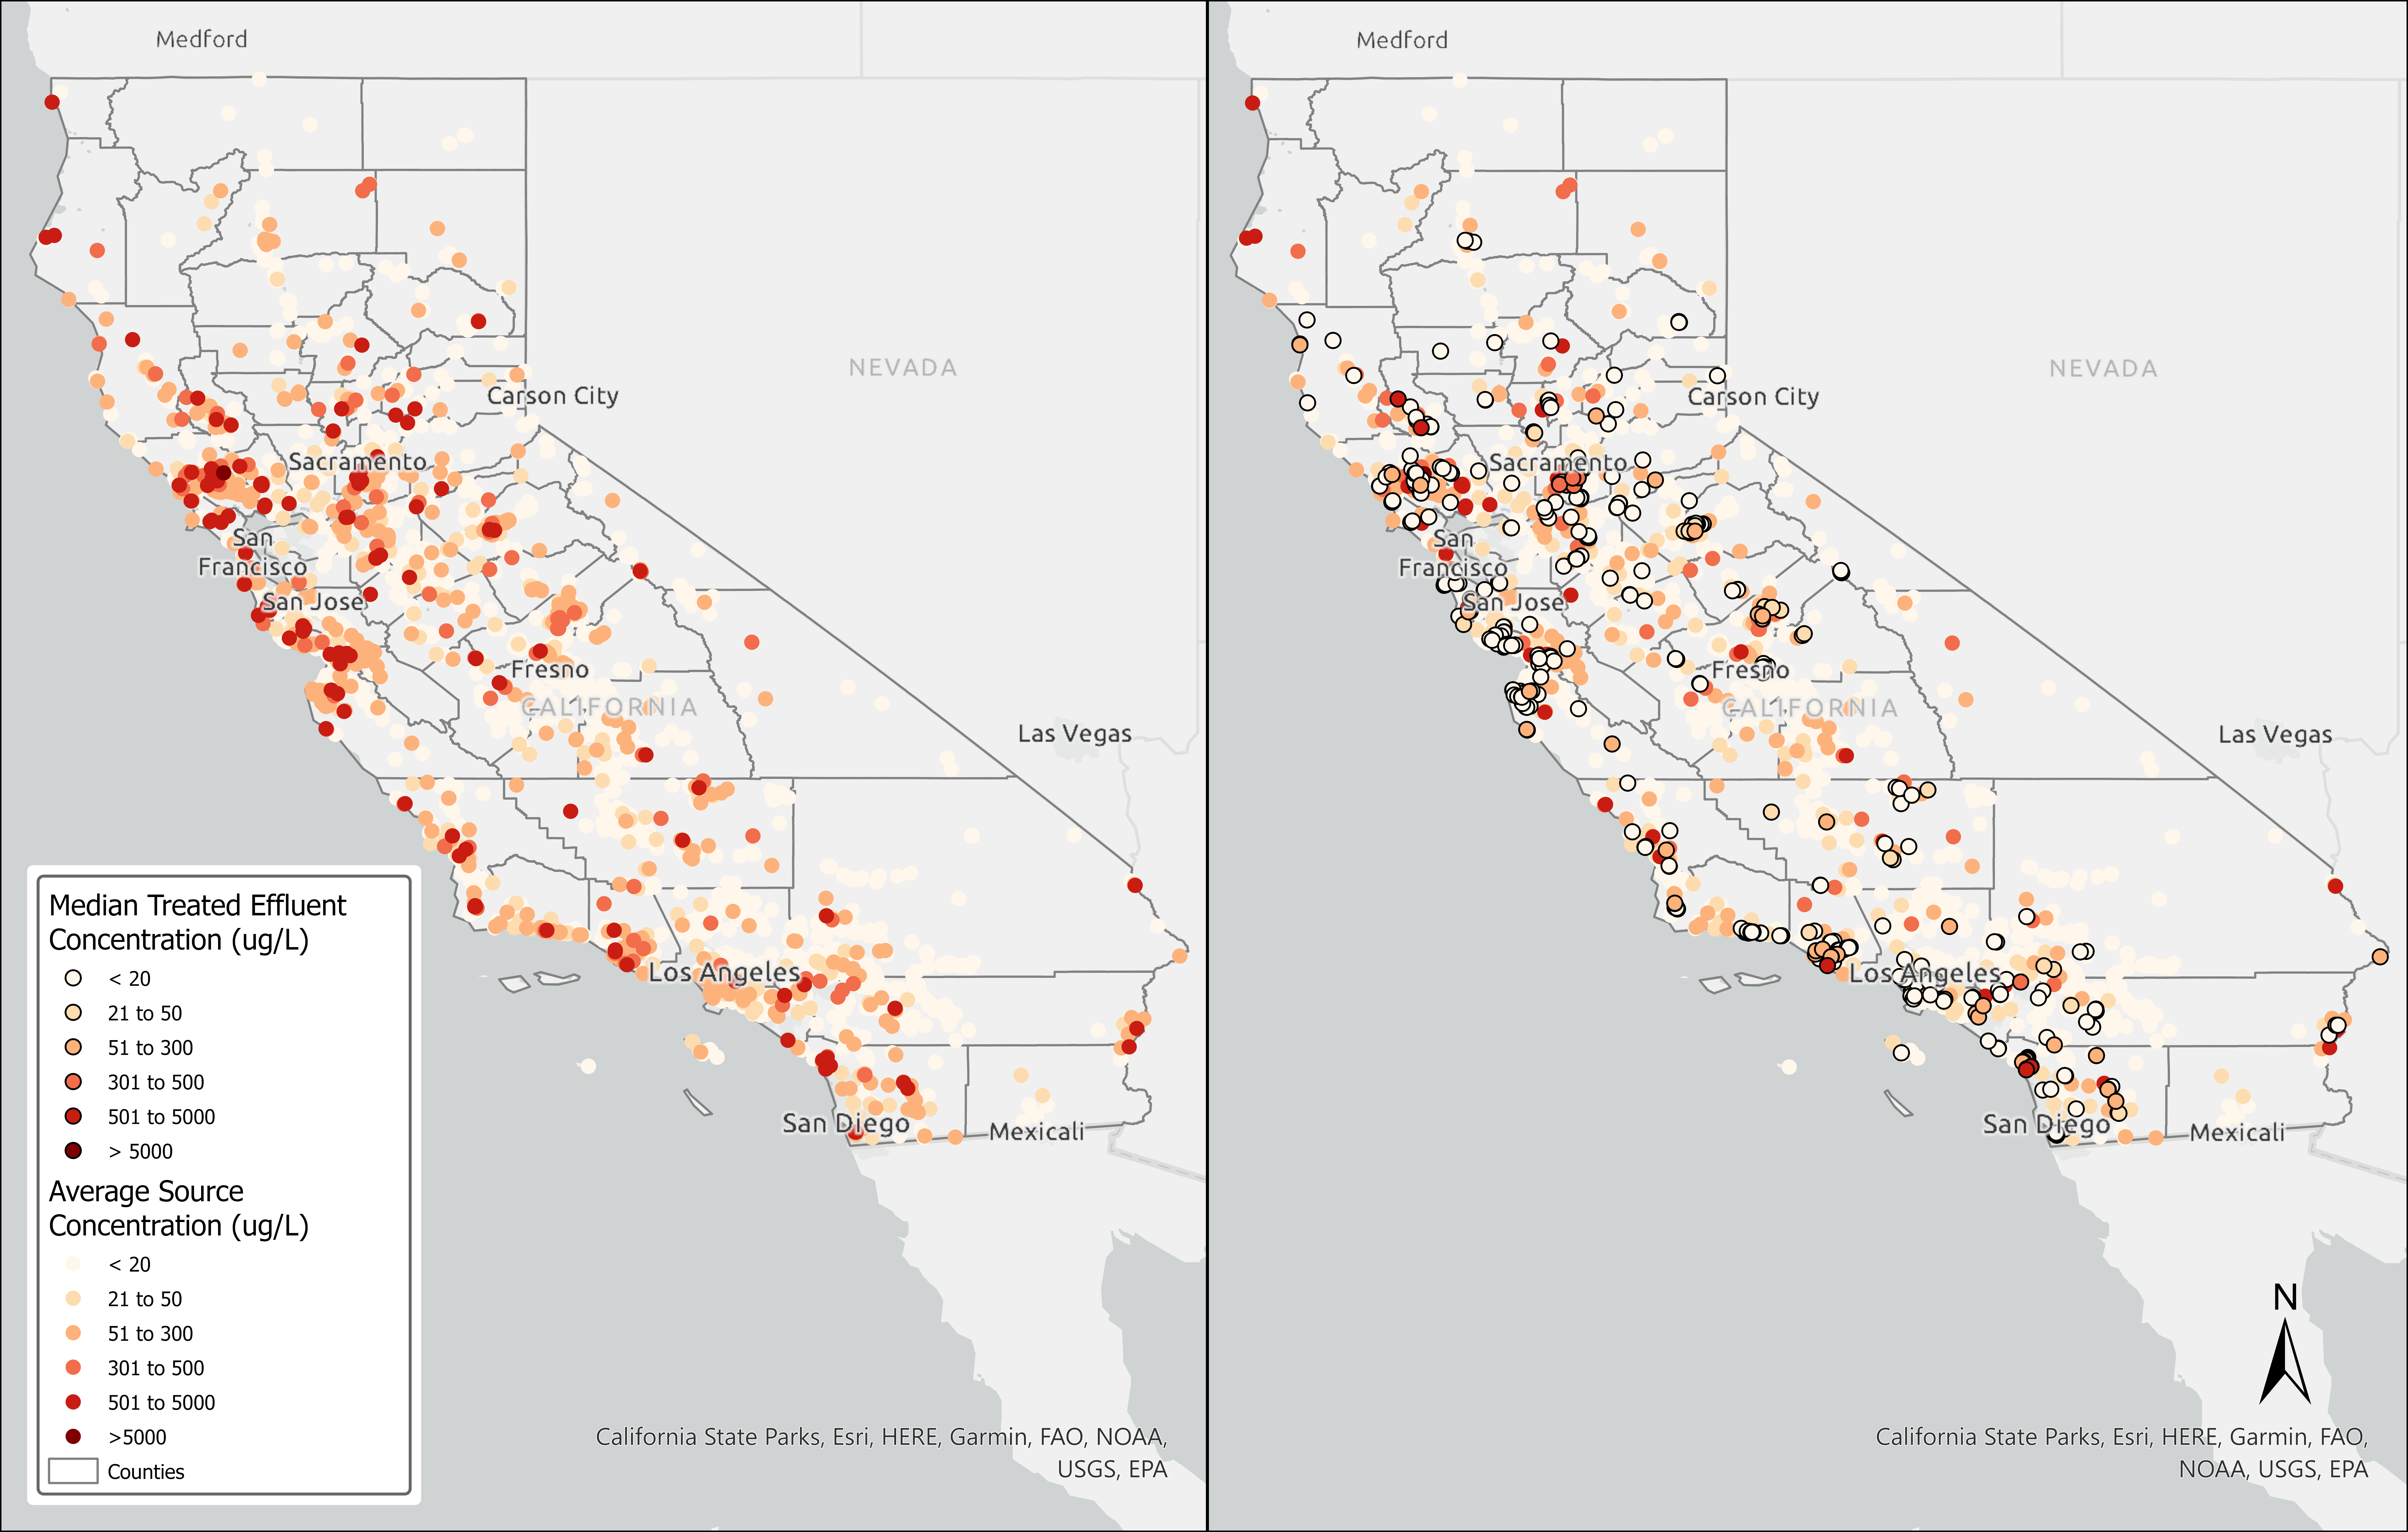 Map on left shows average manganese source concentrations in 2020. Map on right shows median treated effluent manganese concentrations in 2020 entering the distribution system for sources with active manganese treatment.